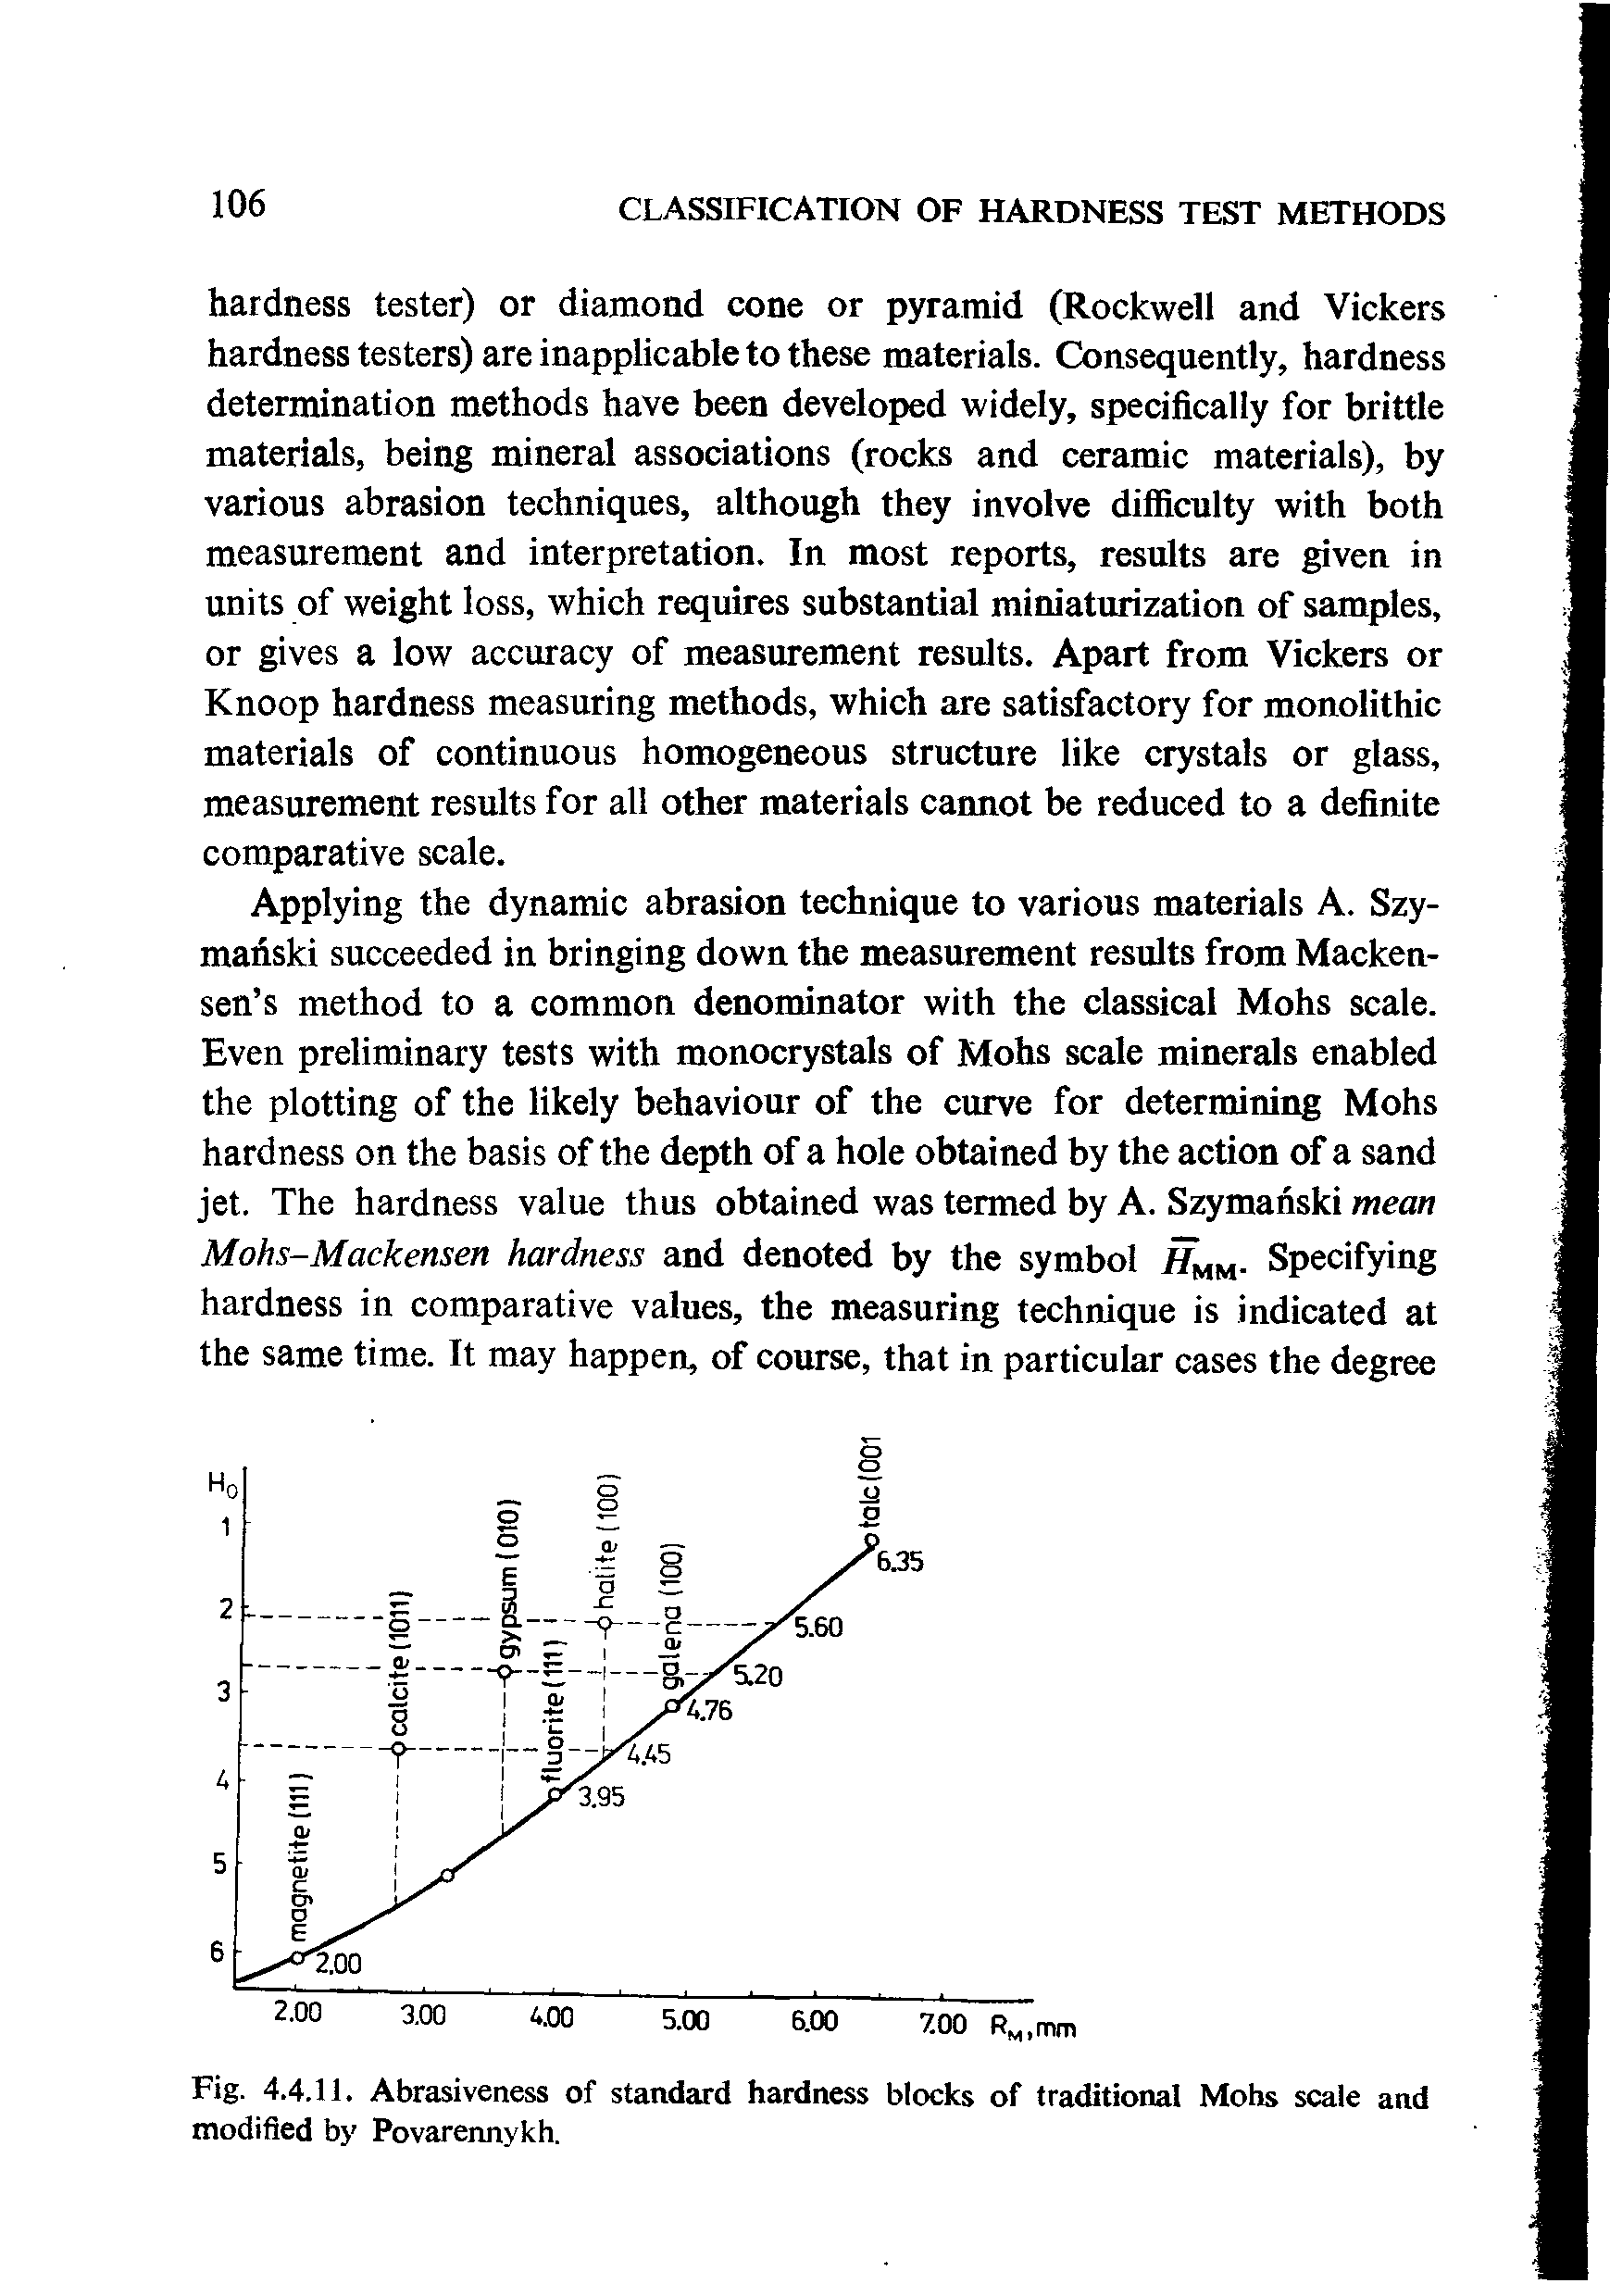 Fig. 4.4.11. Abrasiveness of standard hardness blocks of traditional Mohs scale and modified by Povarennykh.